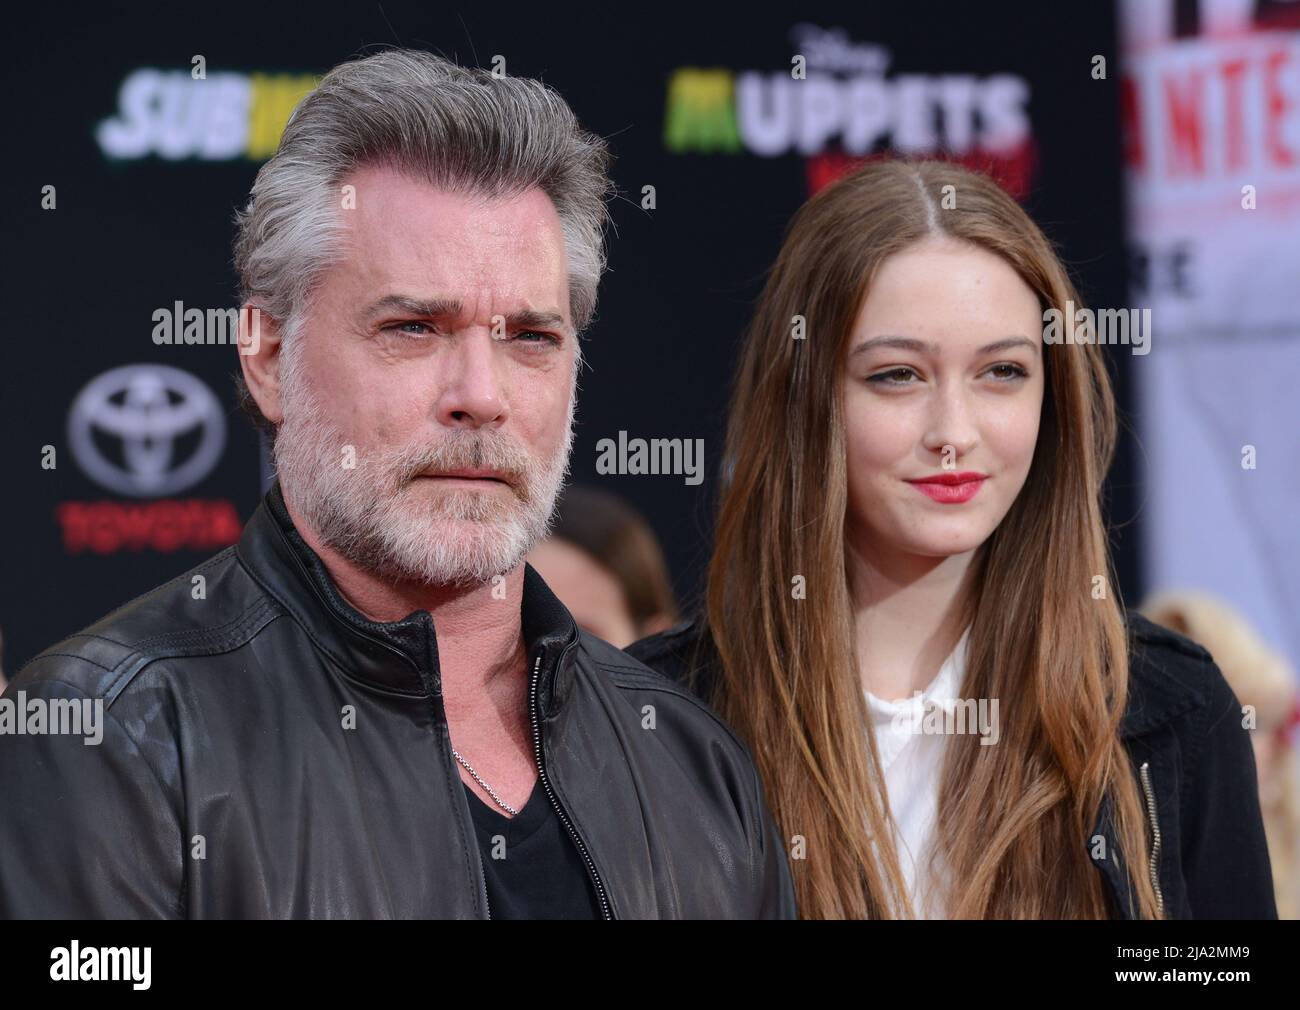 Los Angeles, USA. 11th Mar, 2014. Ray Liotta and daughter Karsen Liotta arriving at the Muppets Most Wanted Premiere at the El Capitan Theatre in Los Angeles.Ray Liotta and daughter Karsen Liotta 071 Ray Liotta, the actor best known for playing mobster has died. He was 67. Credit: Tsuni/USA/Alamy Live News Stock Photo